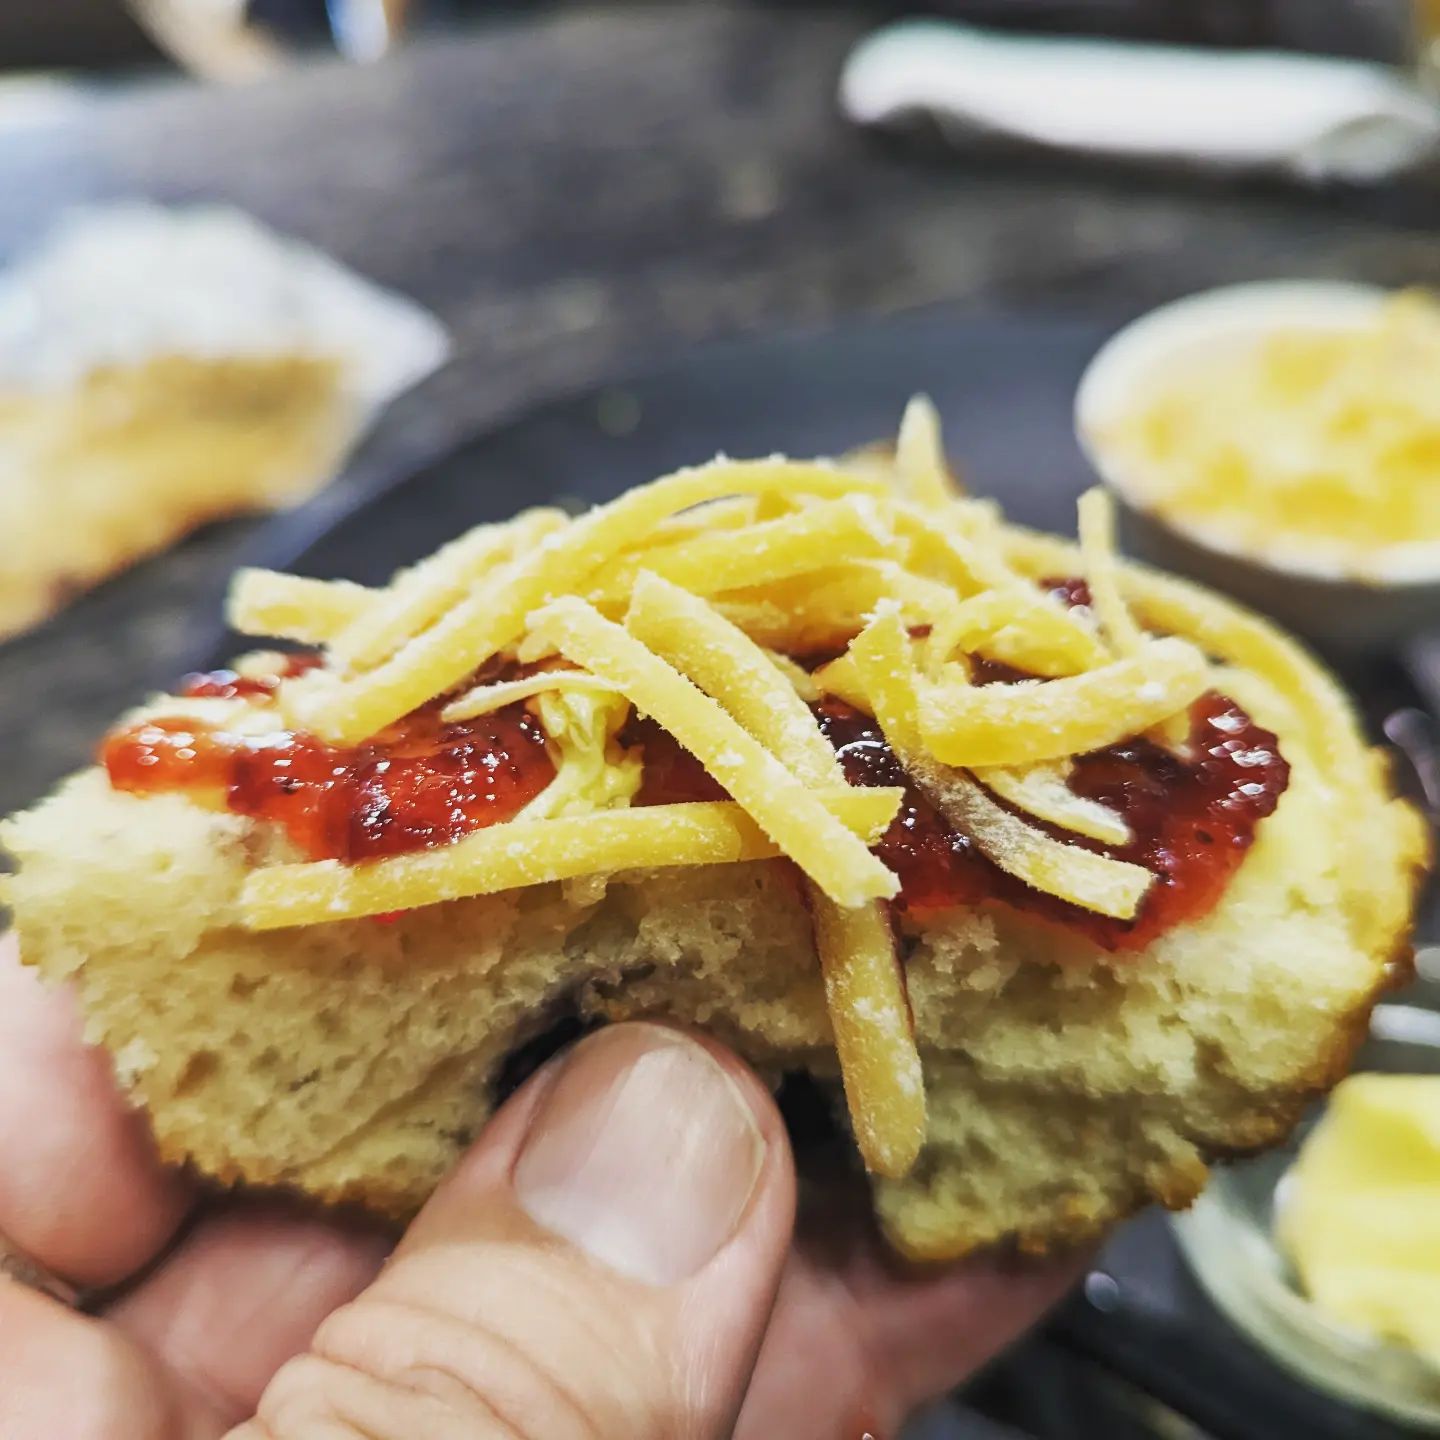 The burning question that divides a nation - do you put jam, THEN grated cheese on your blueberry muffin? Or cheese then jam? #southafricancreamtea #culture #jambasedconundrumsofinstagram #orisitconundra